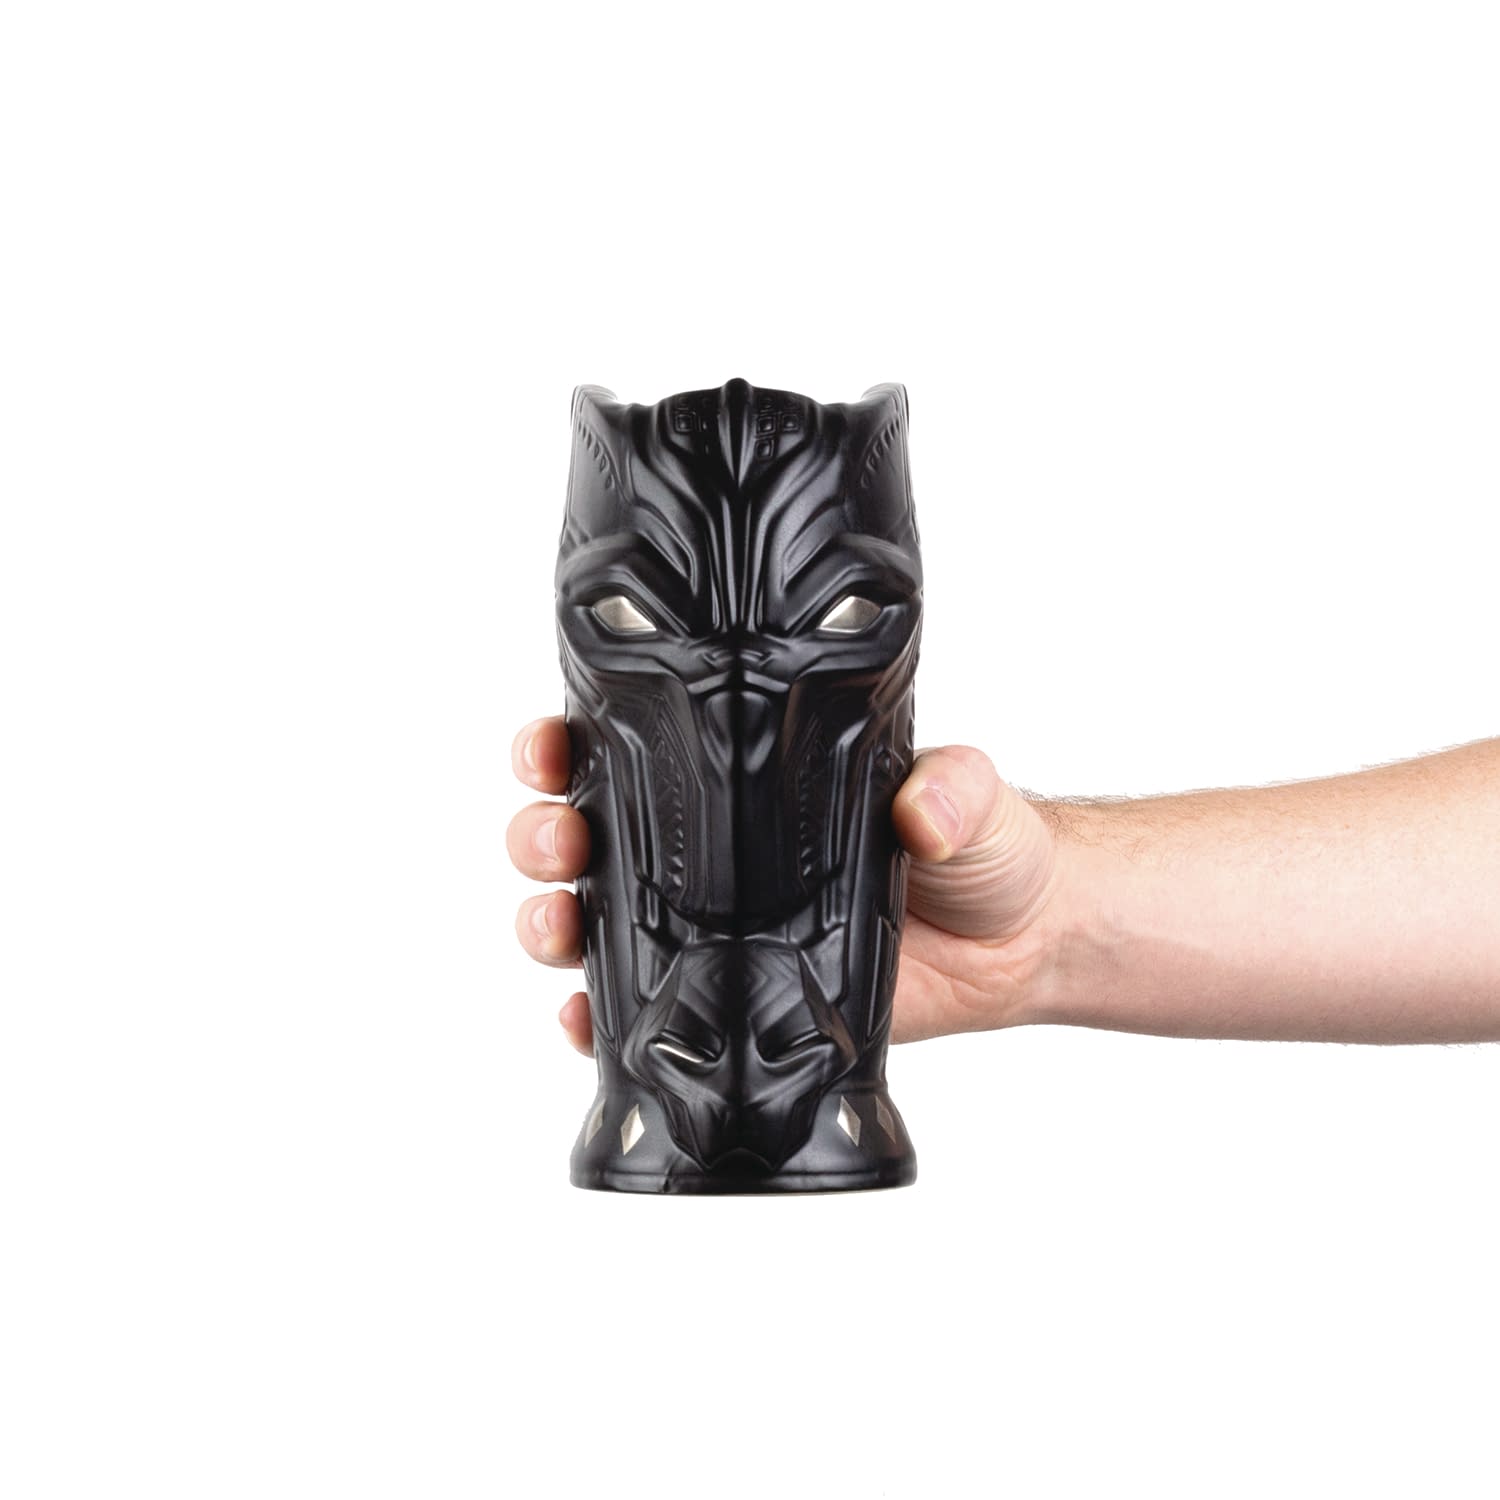 Limited Edition Black Panther PX Previews Exclusives Arrive